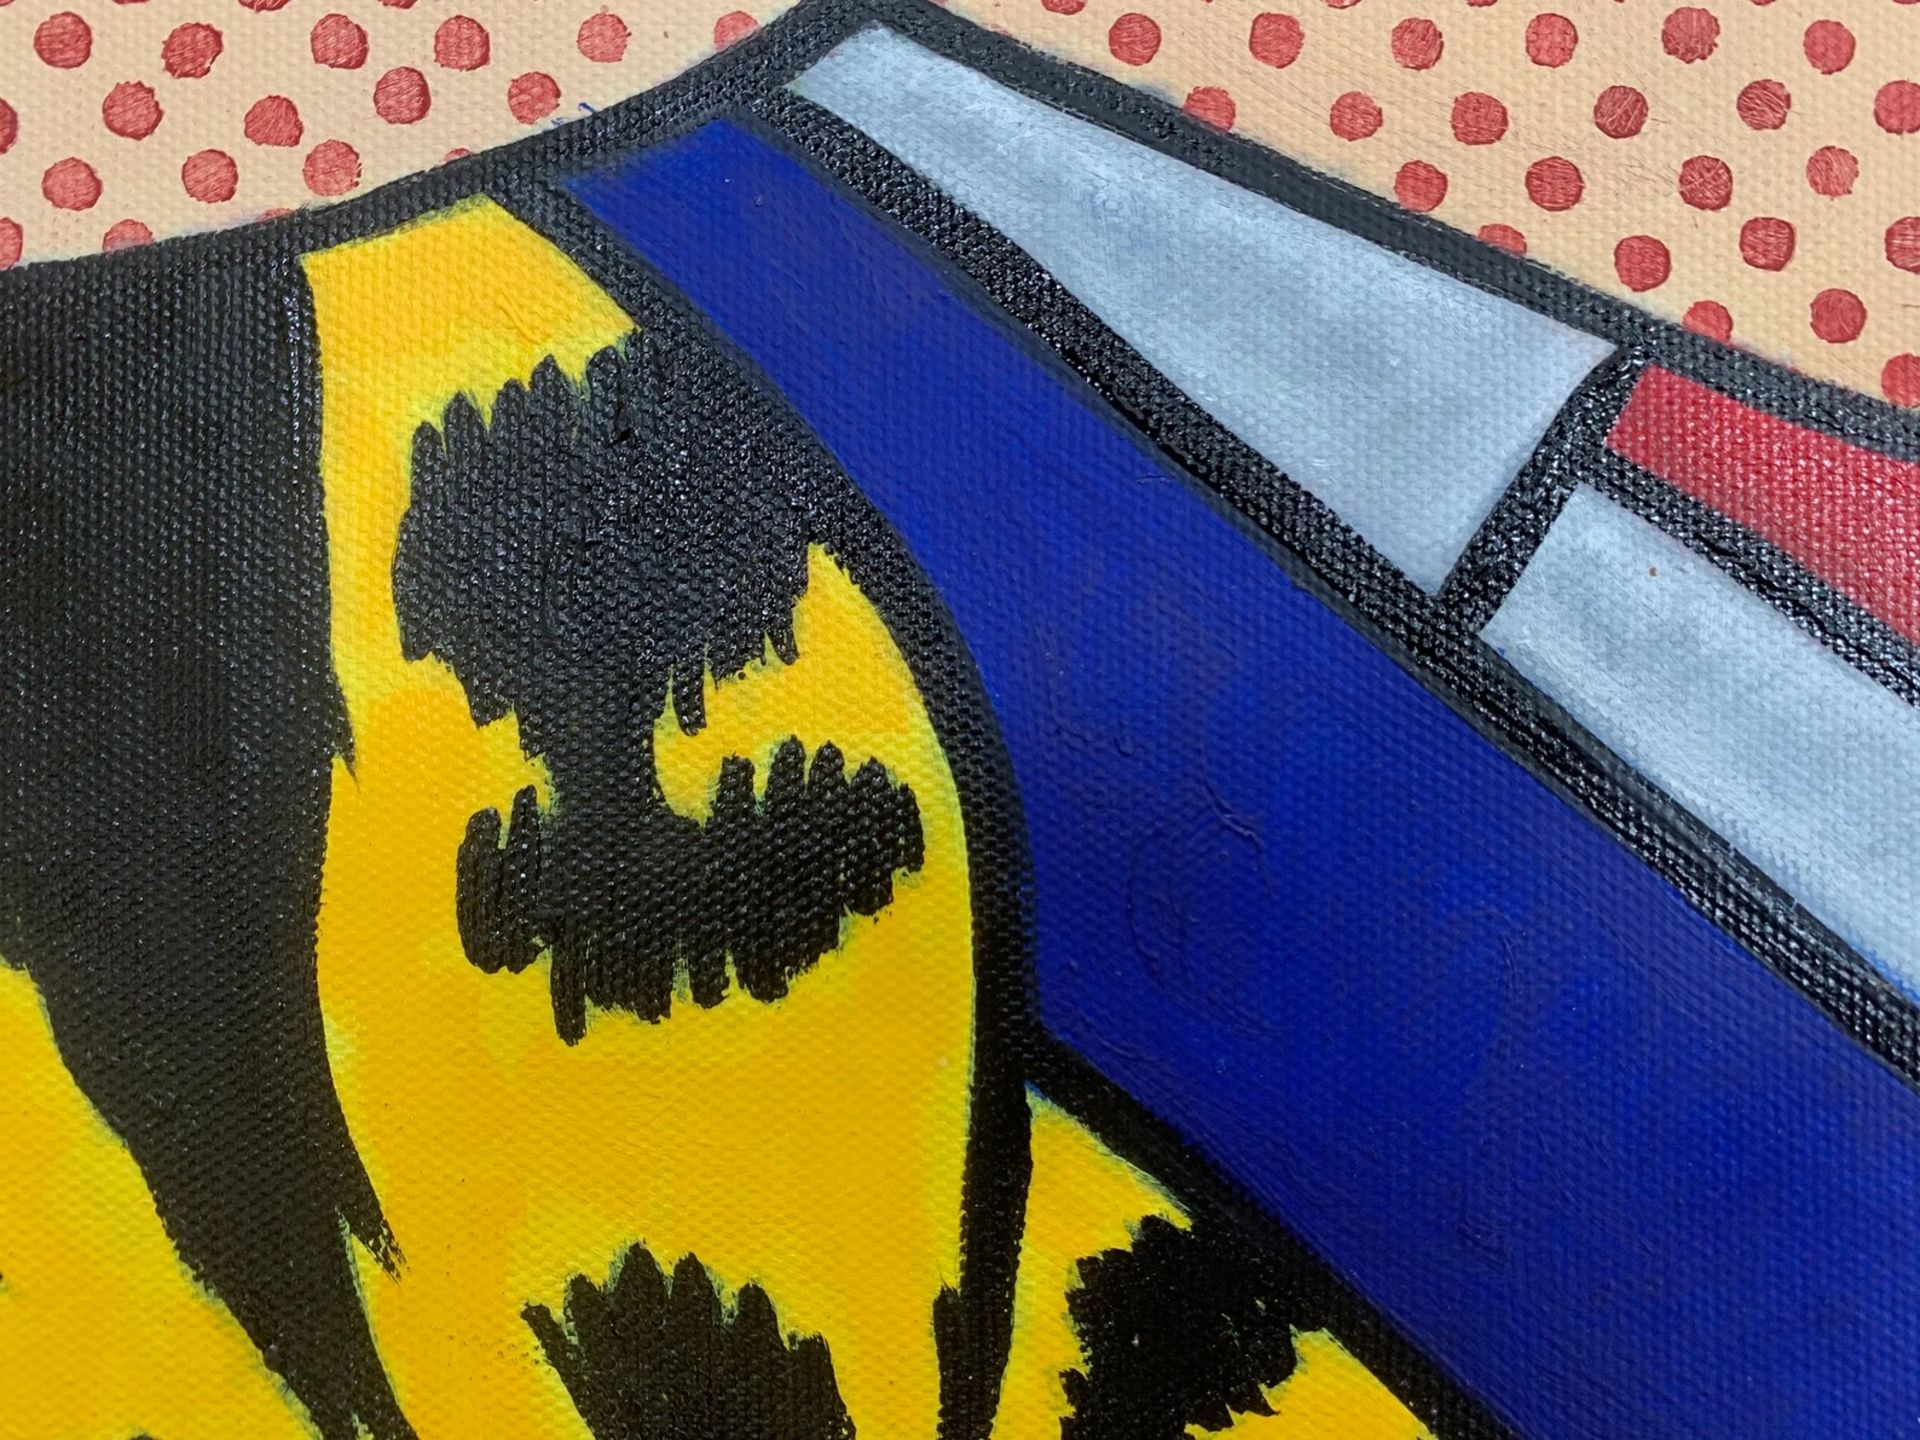 Roy Lichtenstein "In the Car, 1963" Oil Painting - Image 3 of 7